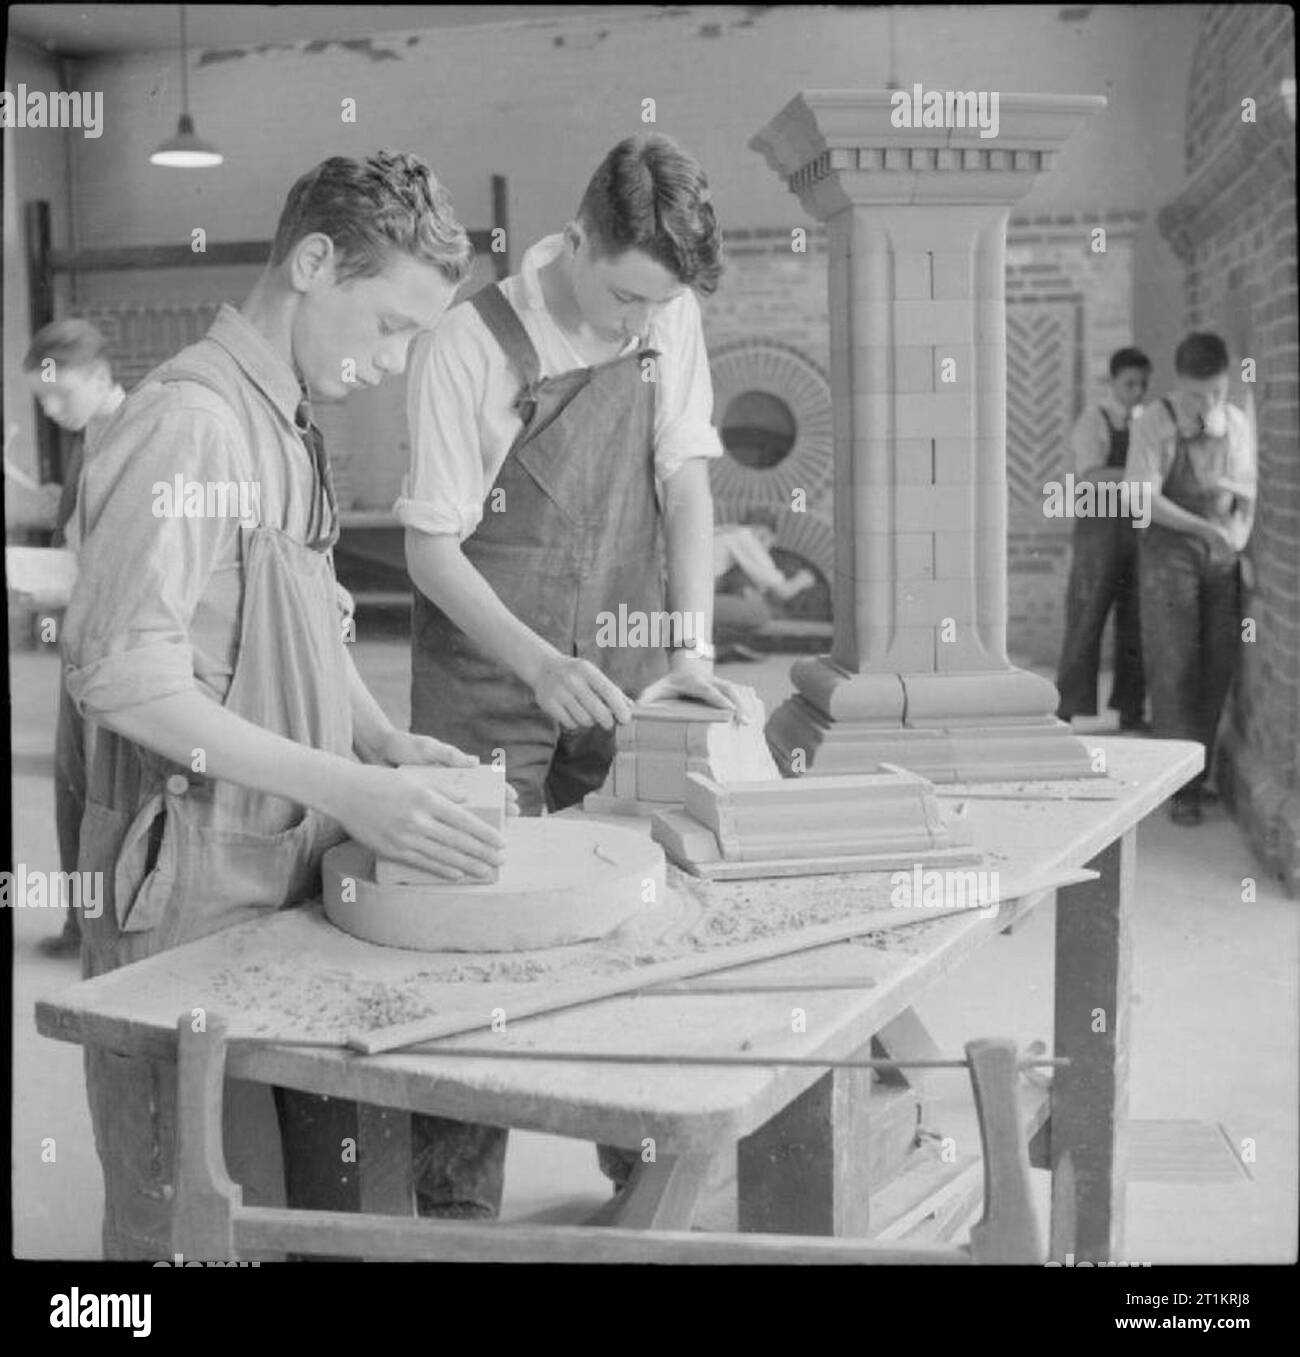 Technical School- Training at Tottenham Polytechnic, Middlesex, England, UK, 1944 Boys work on gauged brickwork during a lesson in the workshop at Tottenham Polytechnic. A large pillar which they have made can be seen on the table beside them. In the background, other boys are working on bricklaying, and their work, including a neatly pointed circular 'porthole' in a brick wall, is clearly visible. Stock Photo